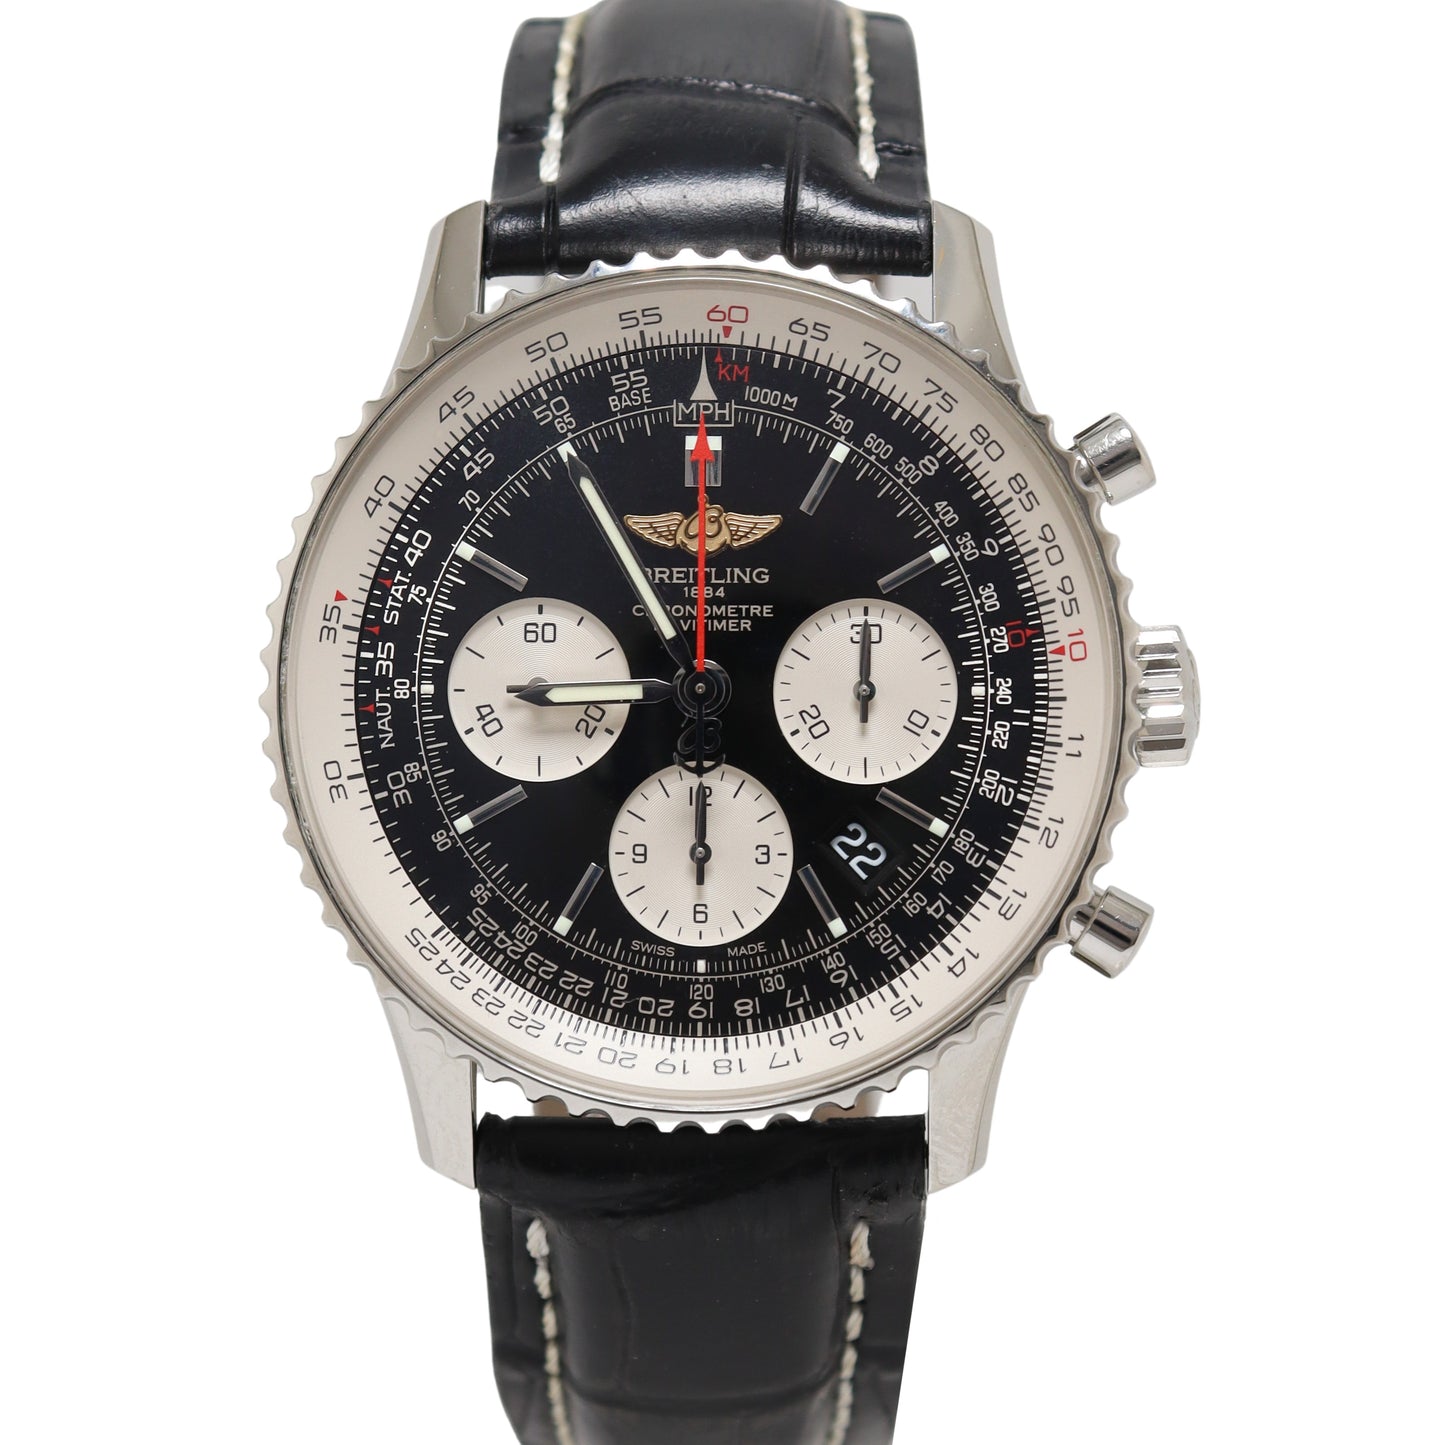 Breitling Navitimer Stainless Steel 43mm Black Chronograph Dial Watch Reference# AB0120 - Happy Jewelers Fine Jewelry Lifetime Warranty